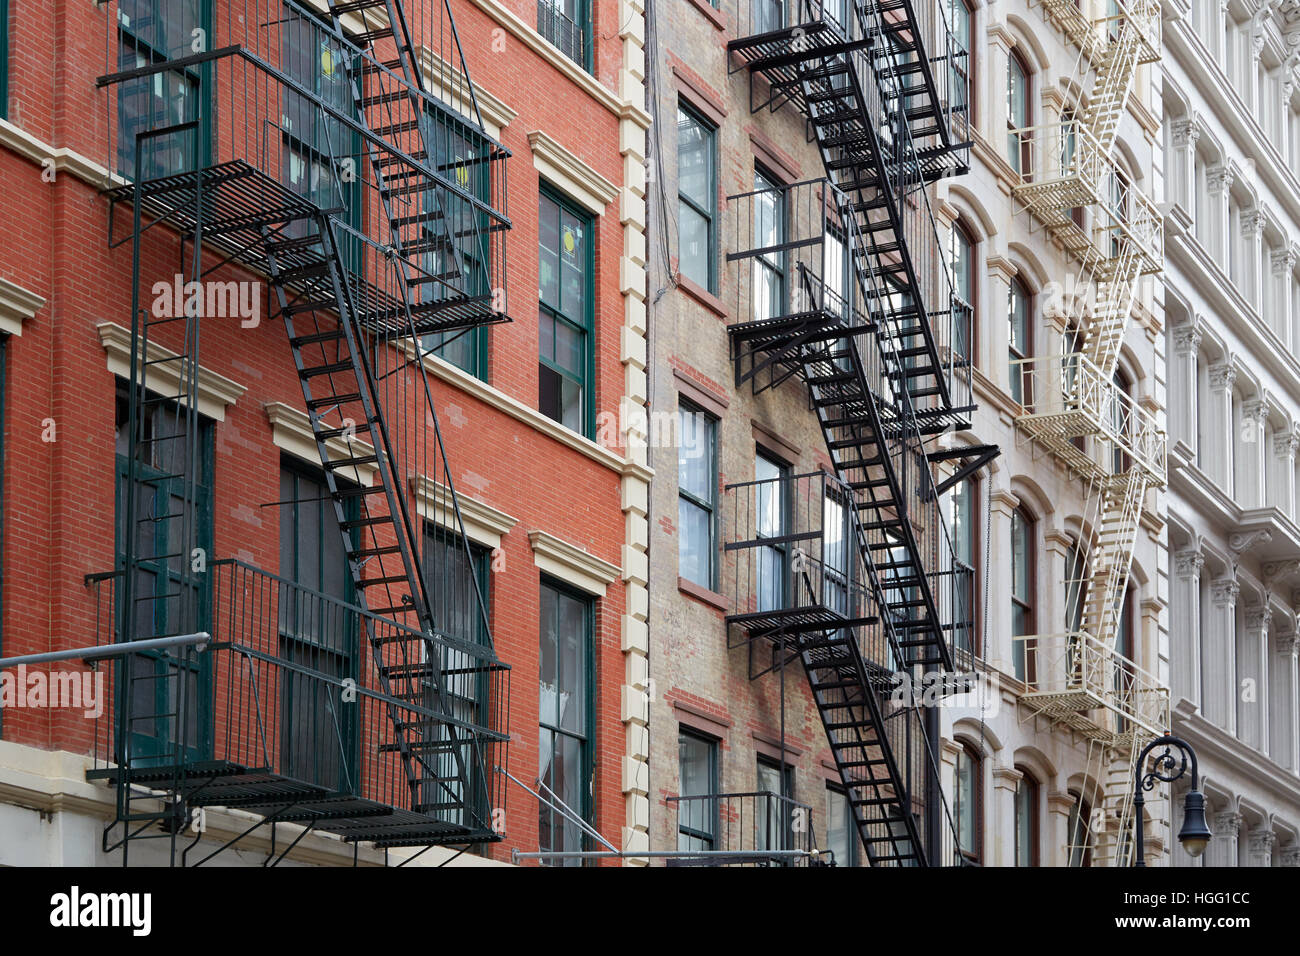 Building facades with fire escape stairs in Soho, New York Stock Photo